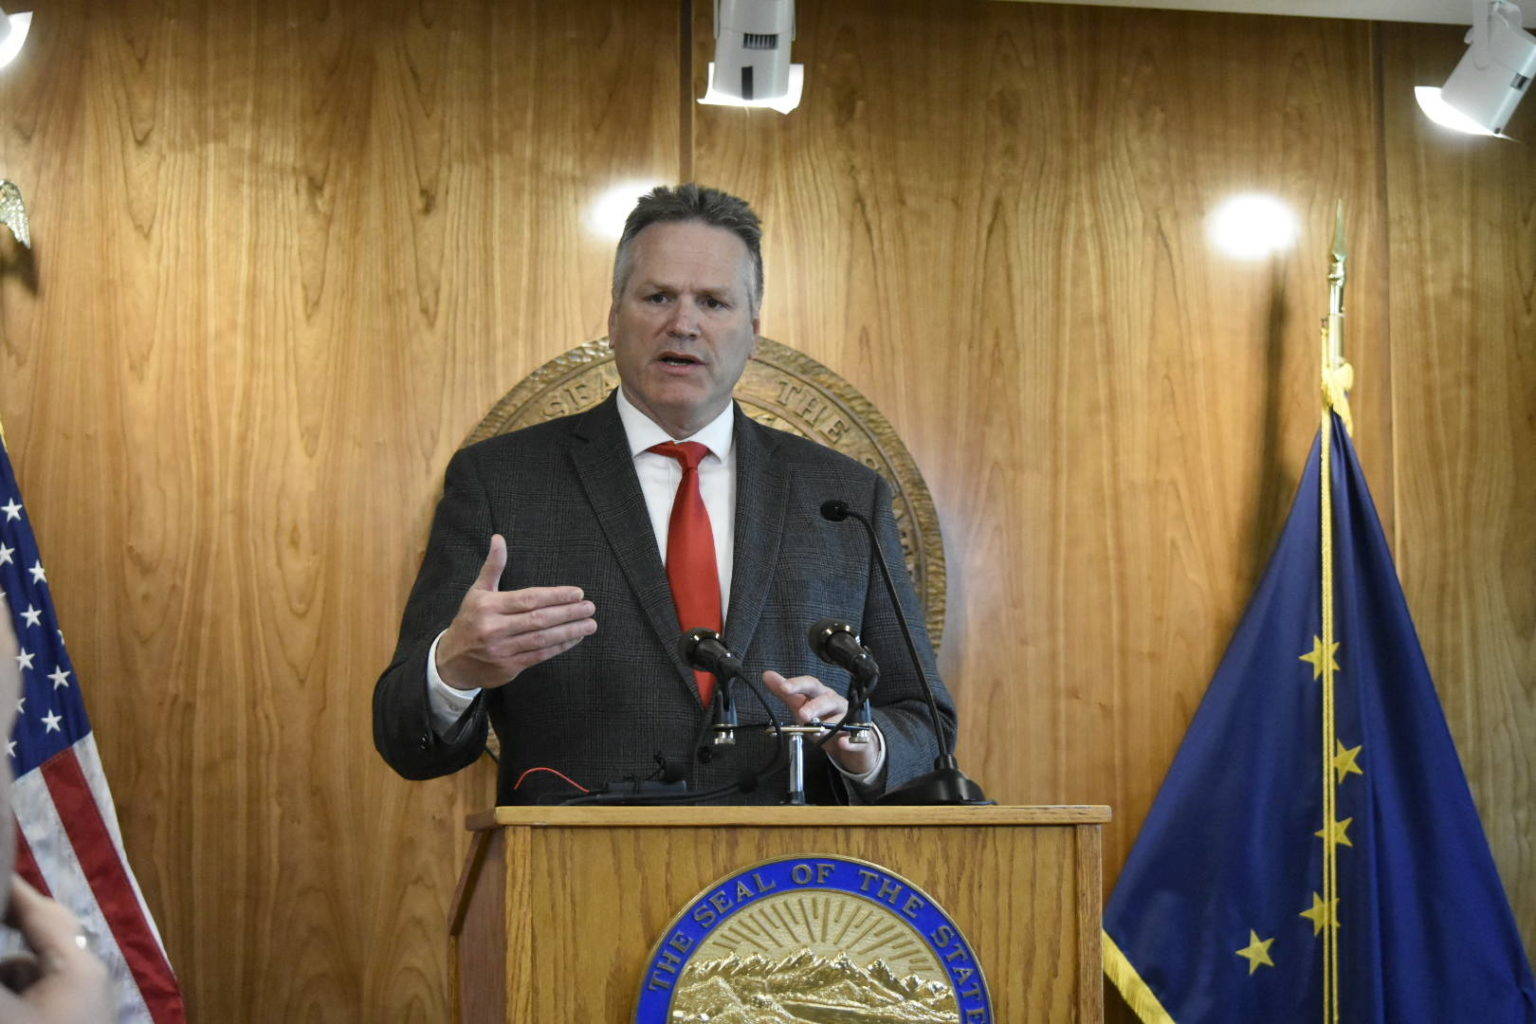 This photo shows Gov. Mike Dunleavy speaking at a July 2021 news conference. (Peter Segall / Juneau Empire File)